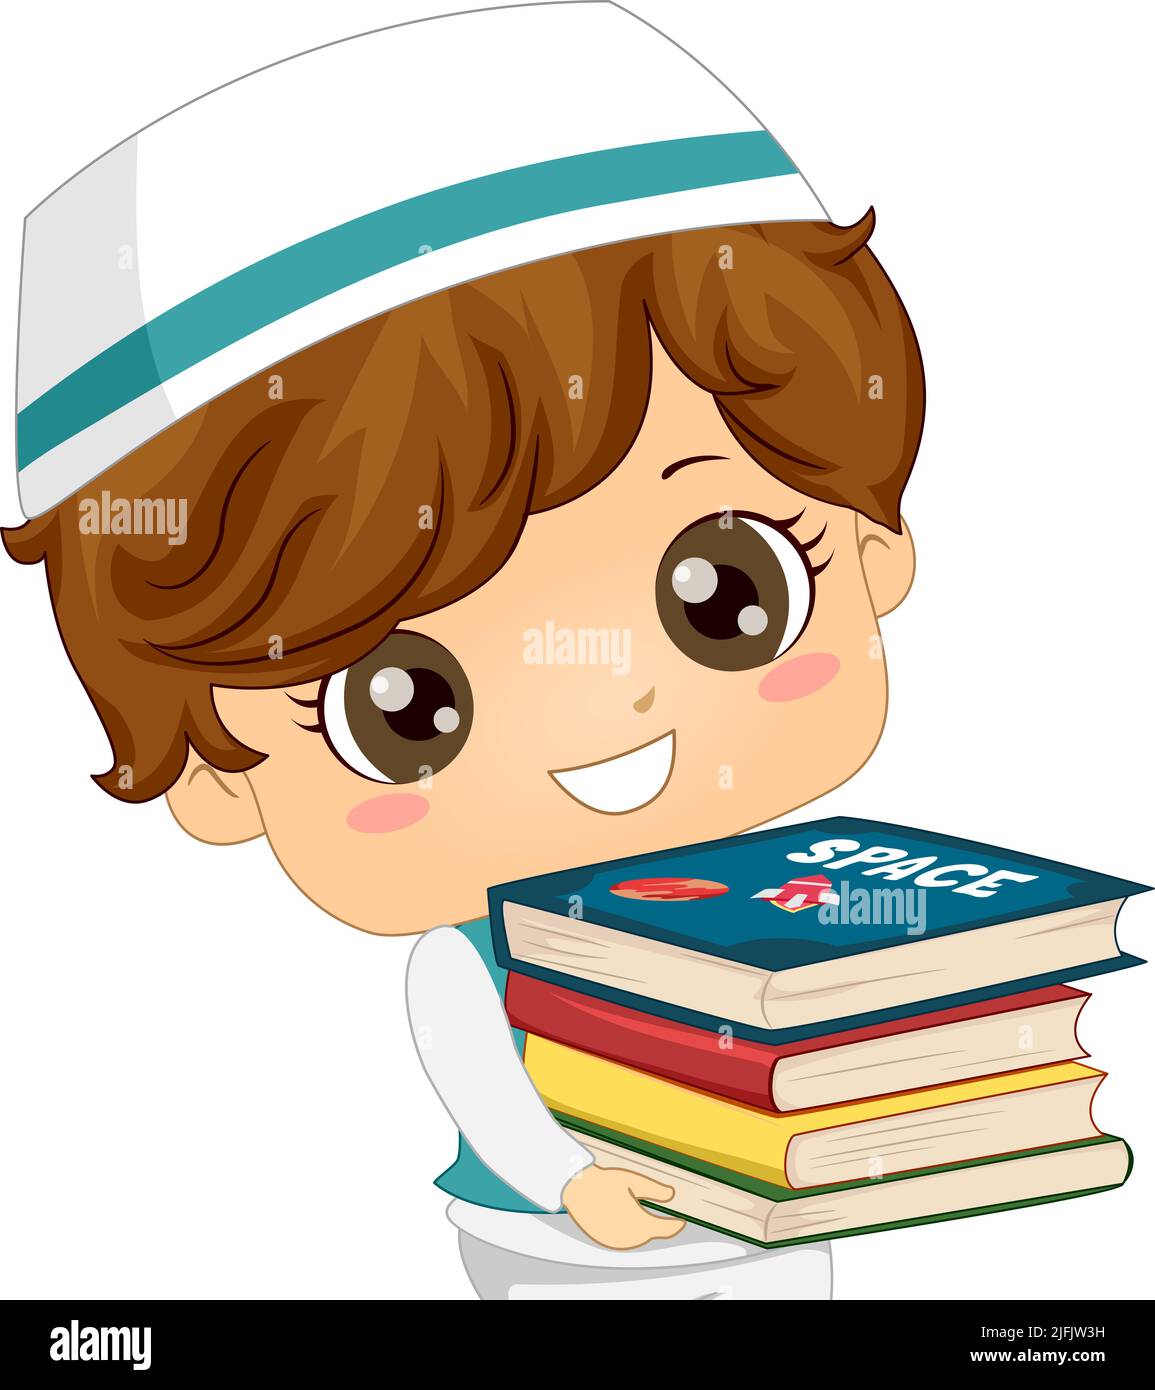 Illustration of Kid Boy Muslim Student Wearing Taqiyah and Carrying a Stack of Books Stock Photo